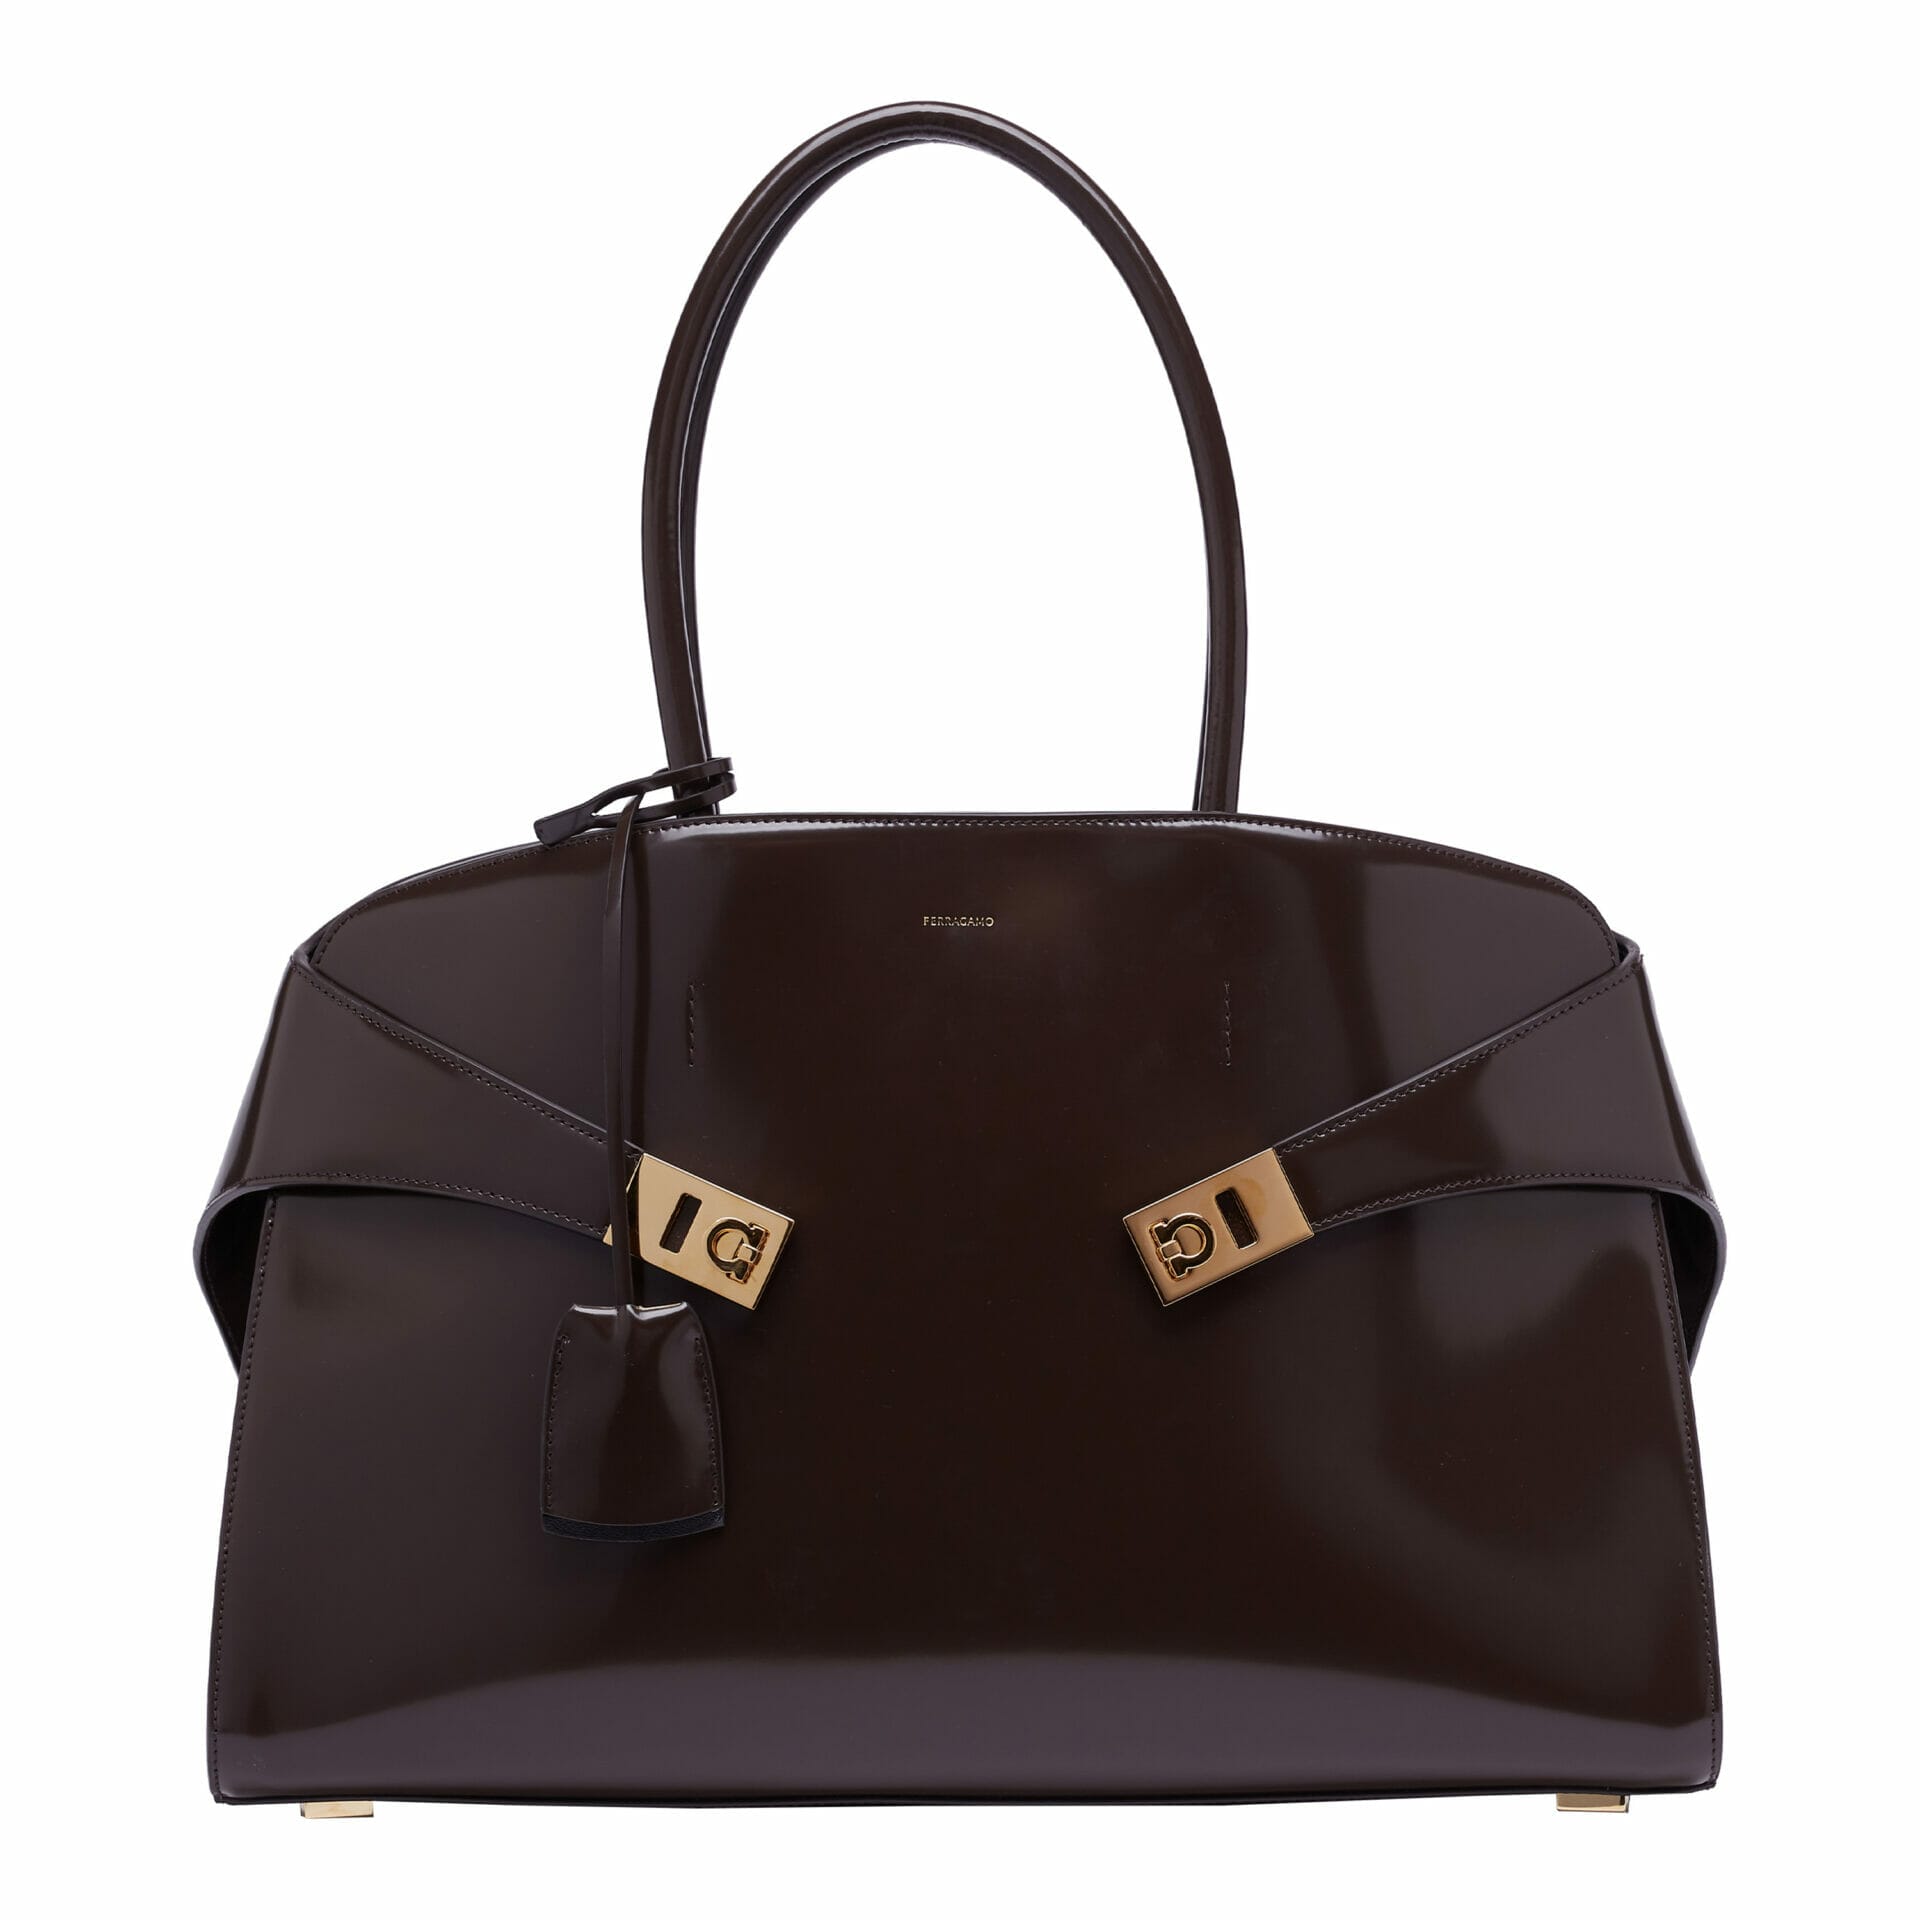 All You Need to Know About The Ferragamo Hug Bag | Harper's BAZAAR Malaysia